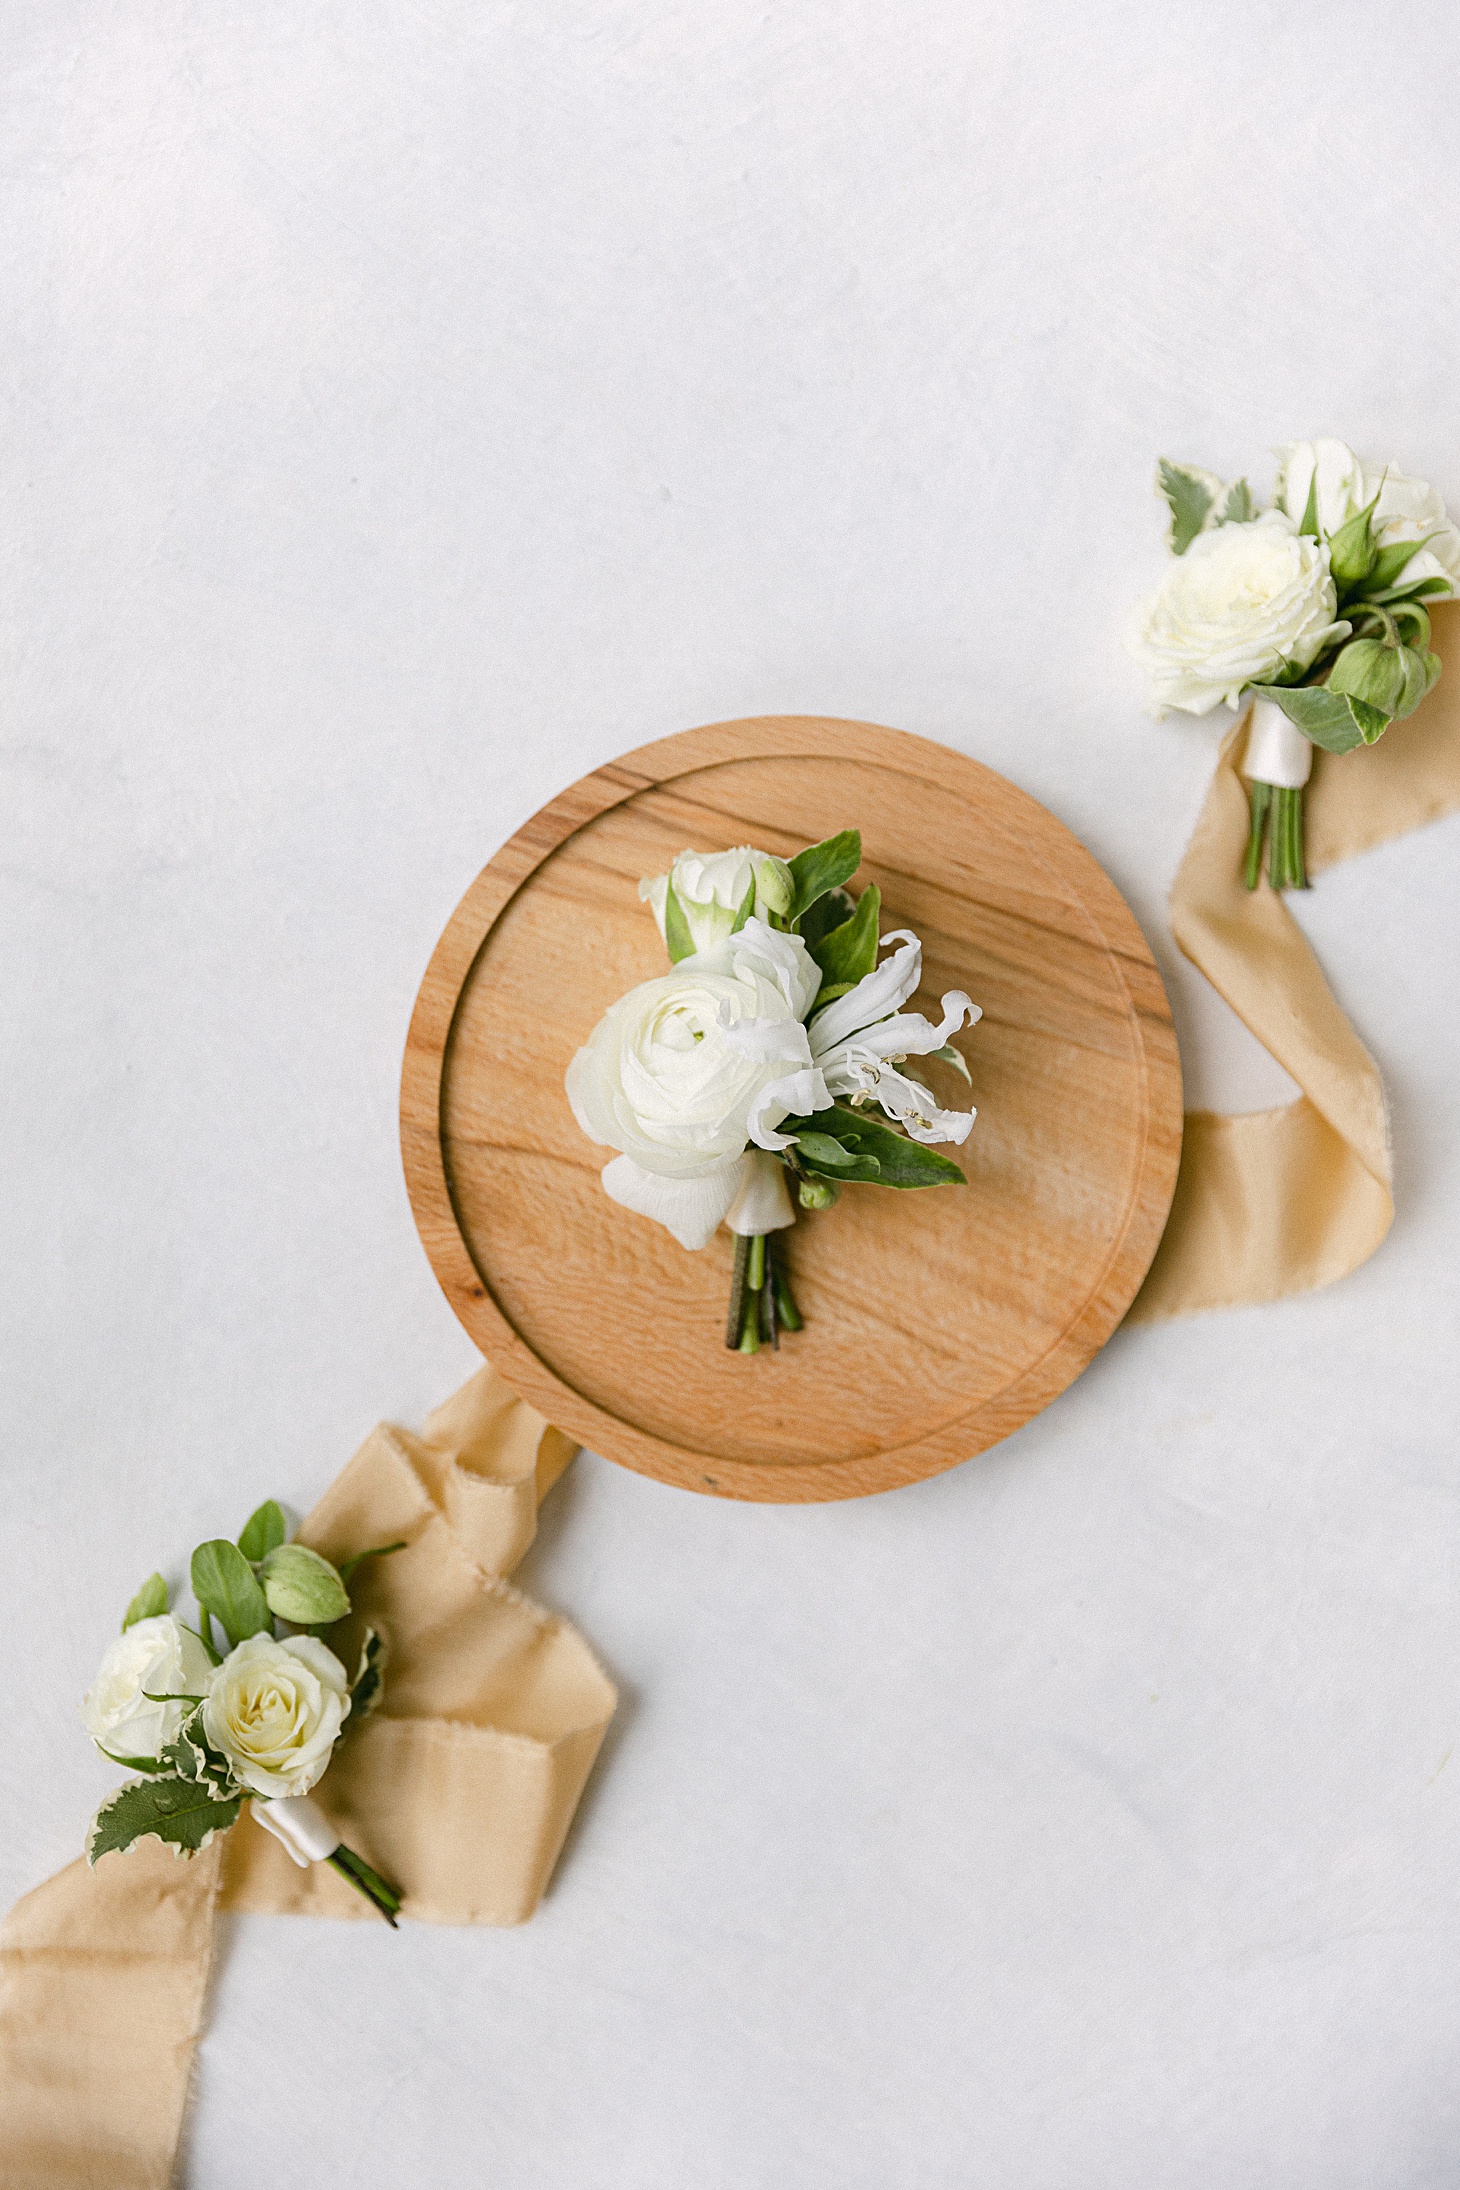 Organic soft white boutonnière by Kate Asire at Old Edwards Inn wedding by Sarah Bradshaw Photography